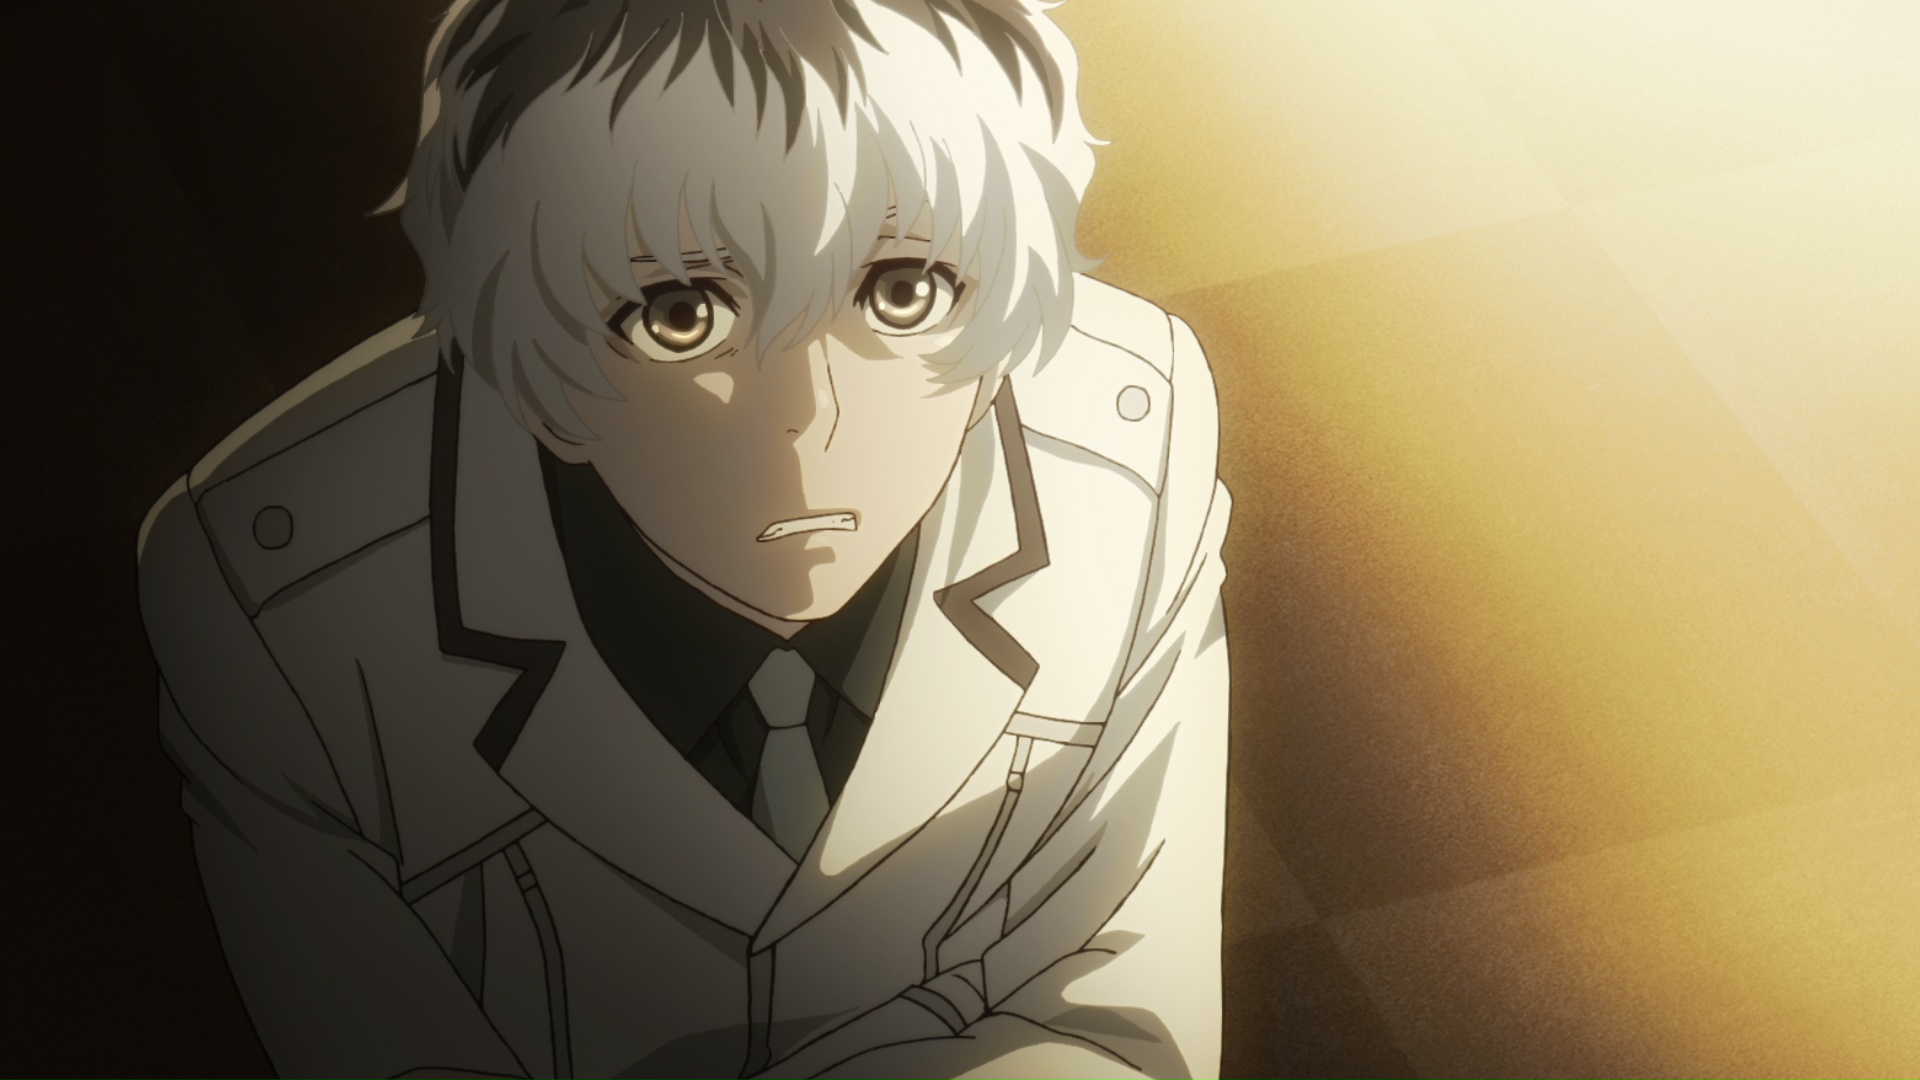 deb clouse recommends Tokyo Ghoul Season 1 Episode 1